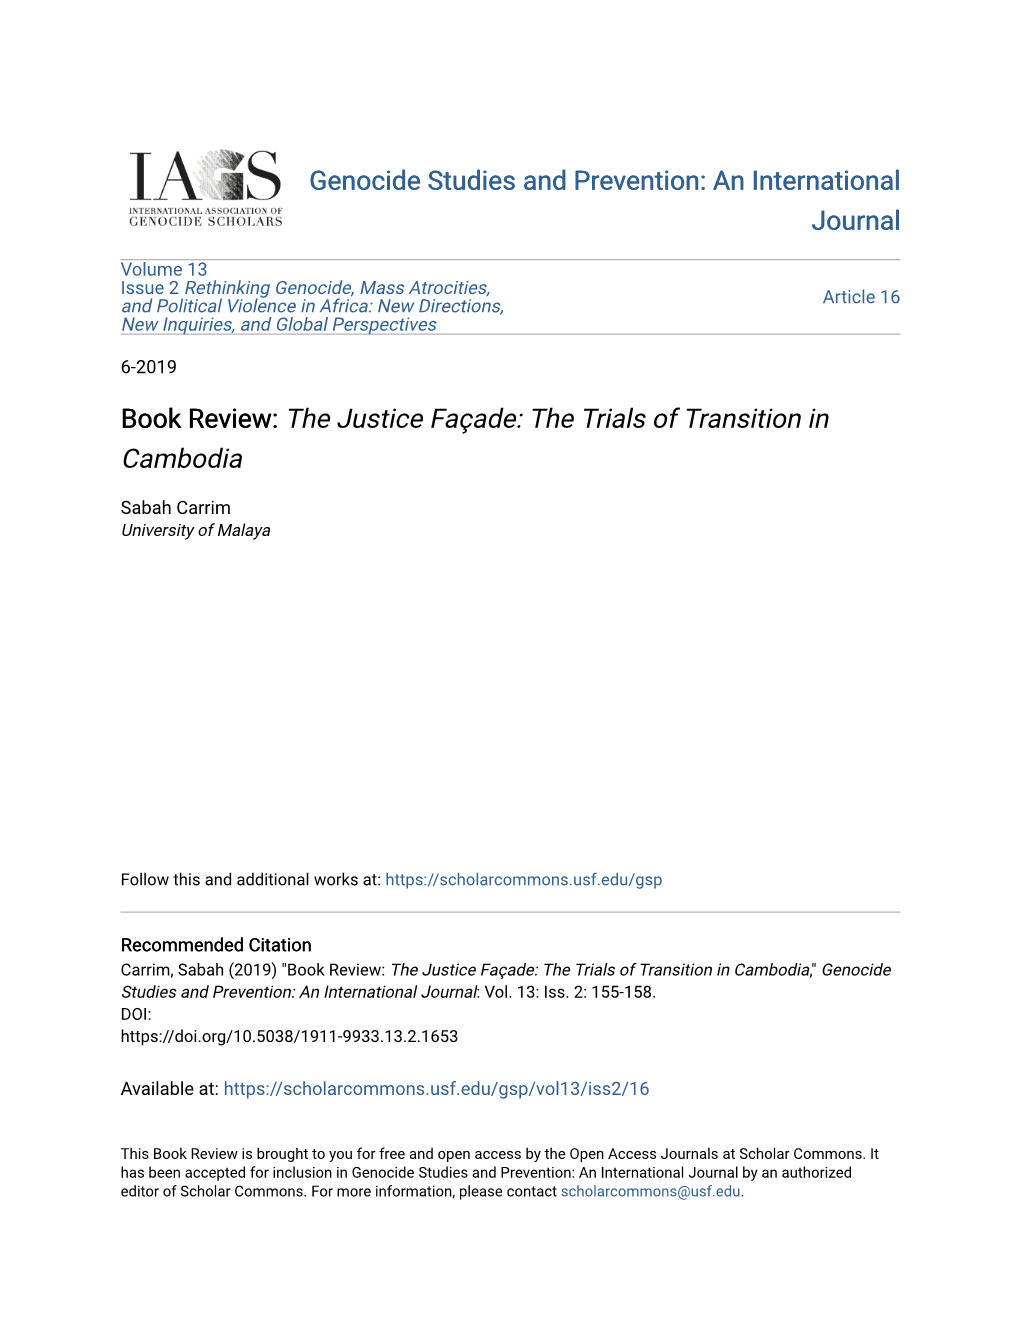 Book Review: the Justice Faã§Ade: the Trials of Transition in Cambodia